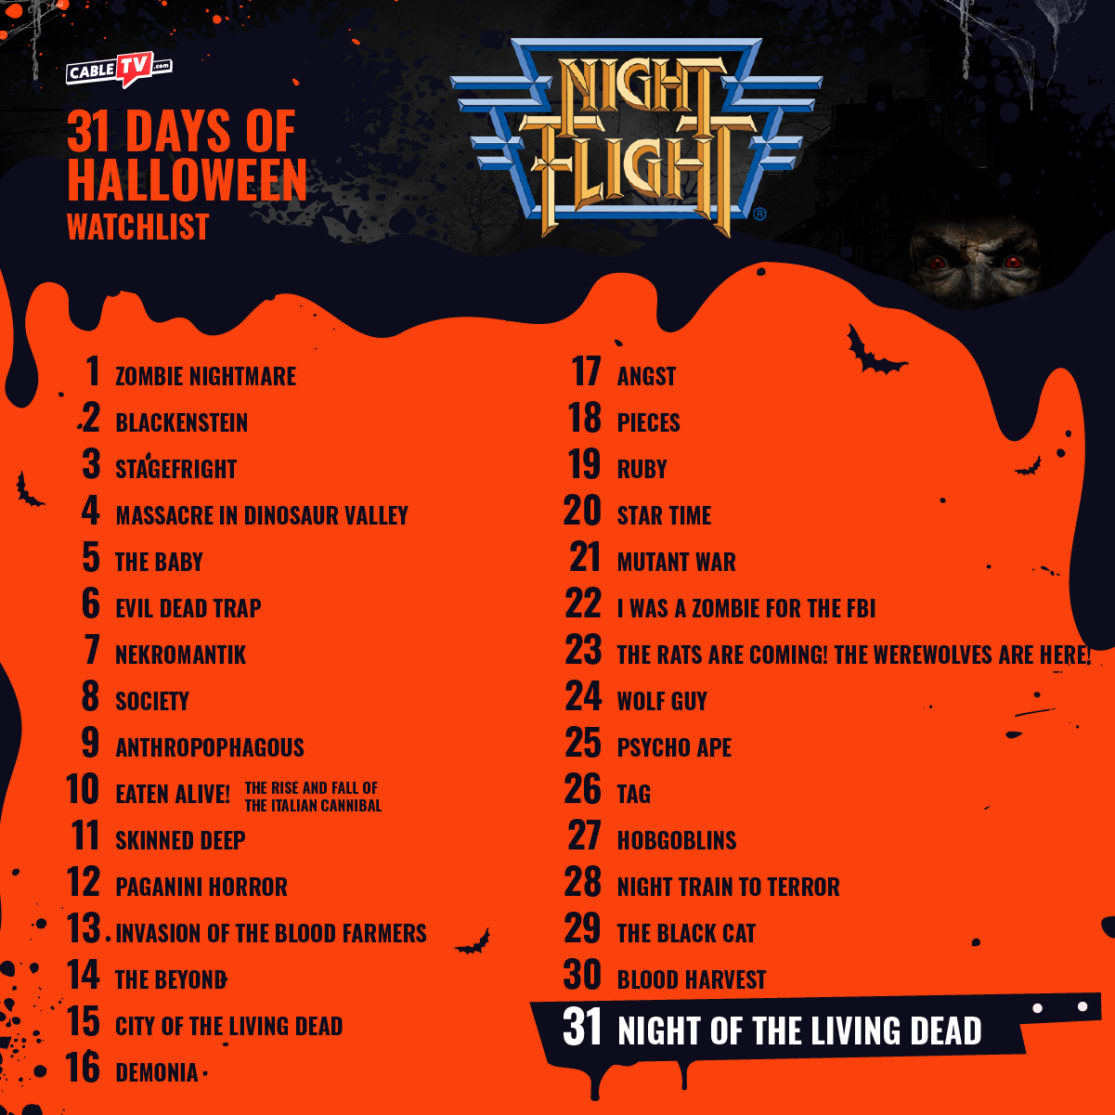 List of 31 horror movies to watch in October on Night Flight Plus